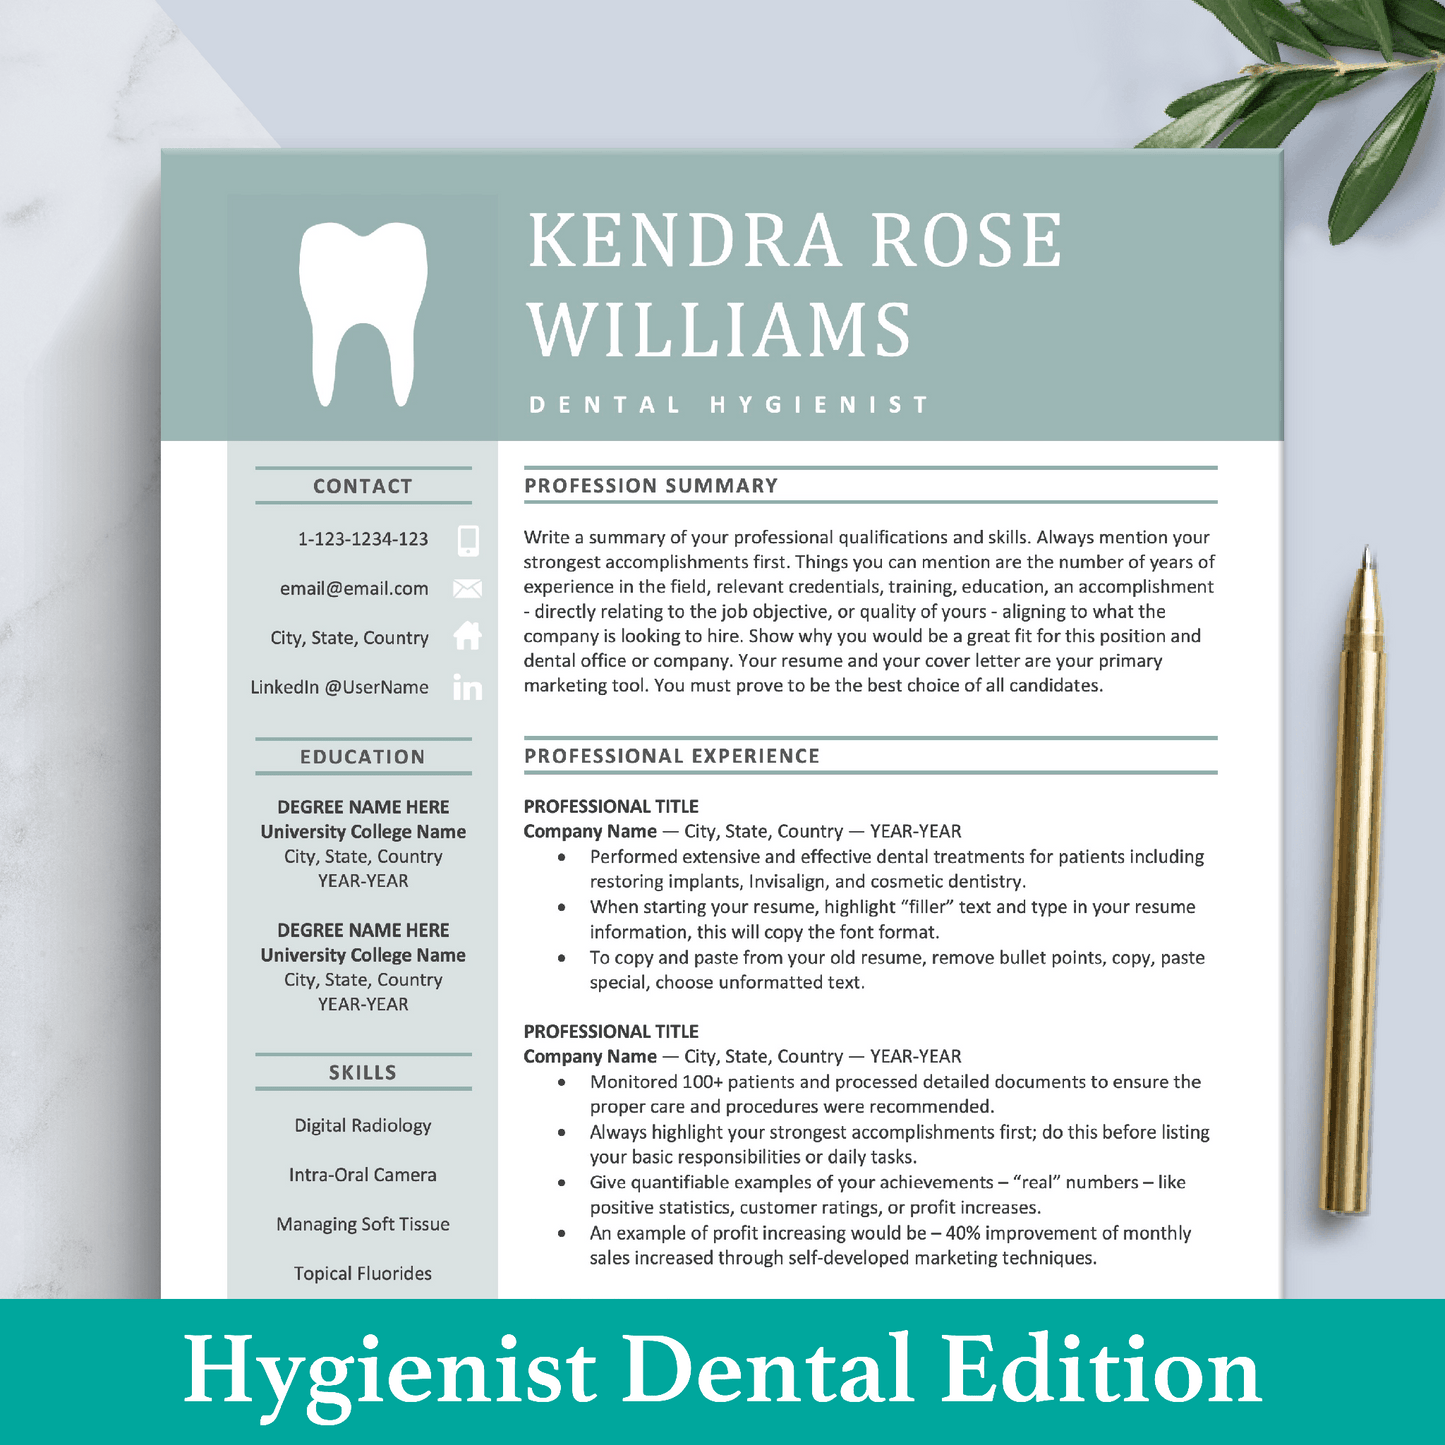 The Art of Resume Templates | Dentist, Hygienist, Dental Student, Assistant Resume CV Design Template Maker, Download for Apple Pages and Microsoft Word, Mac and PC Resume CV Template | Curriculum Vitae for Apple Pages, Microsoft Word, Mac, PC